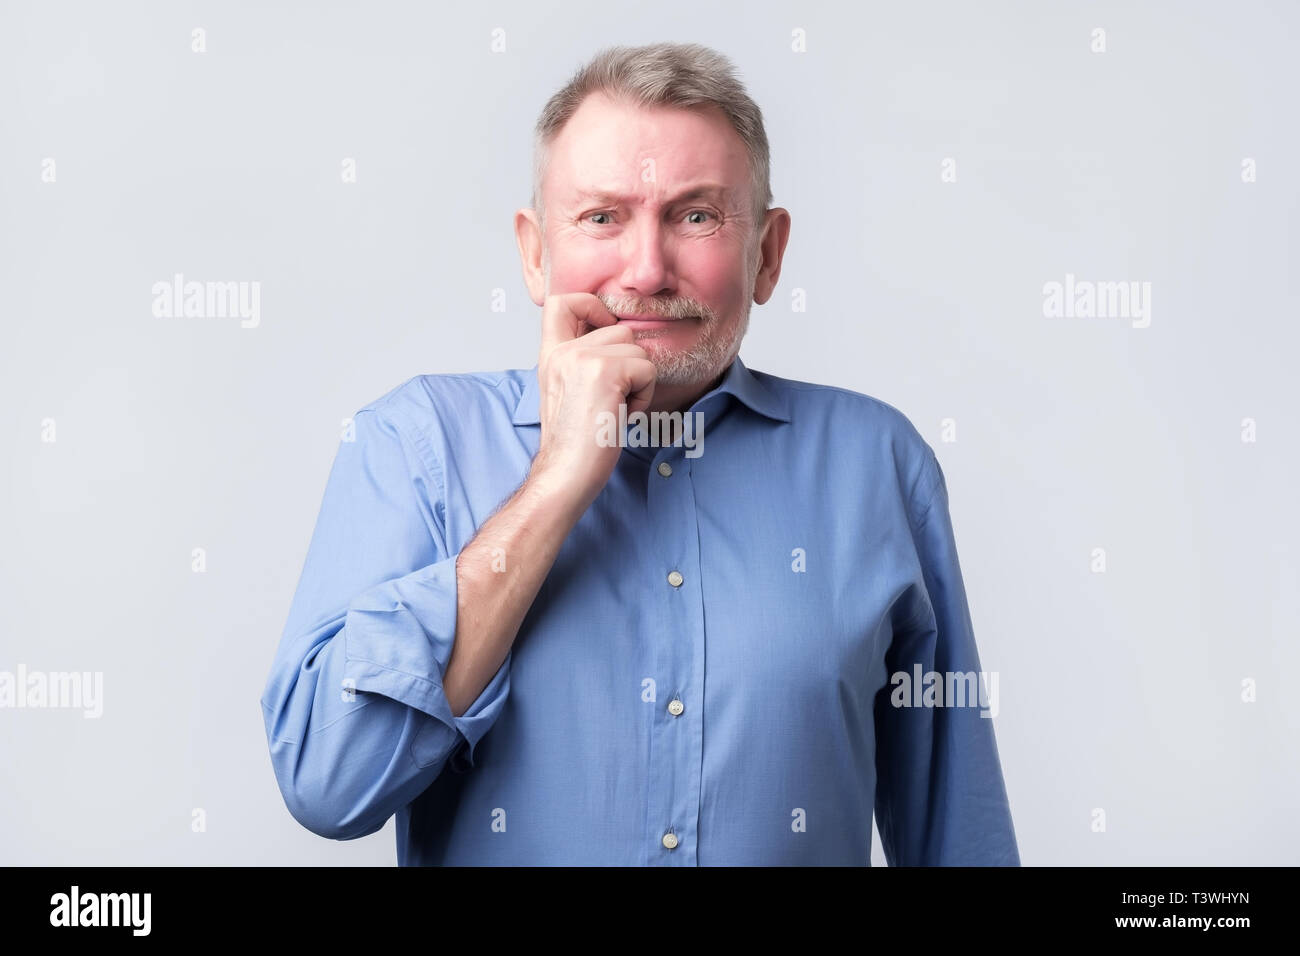 Senior man looks with a guilty apologetic expression Stock Photo